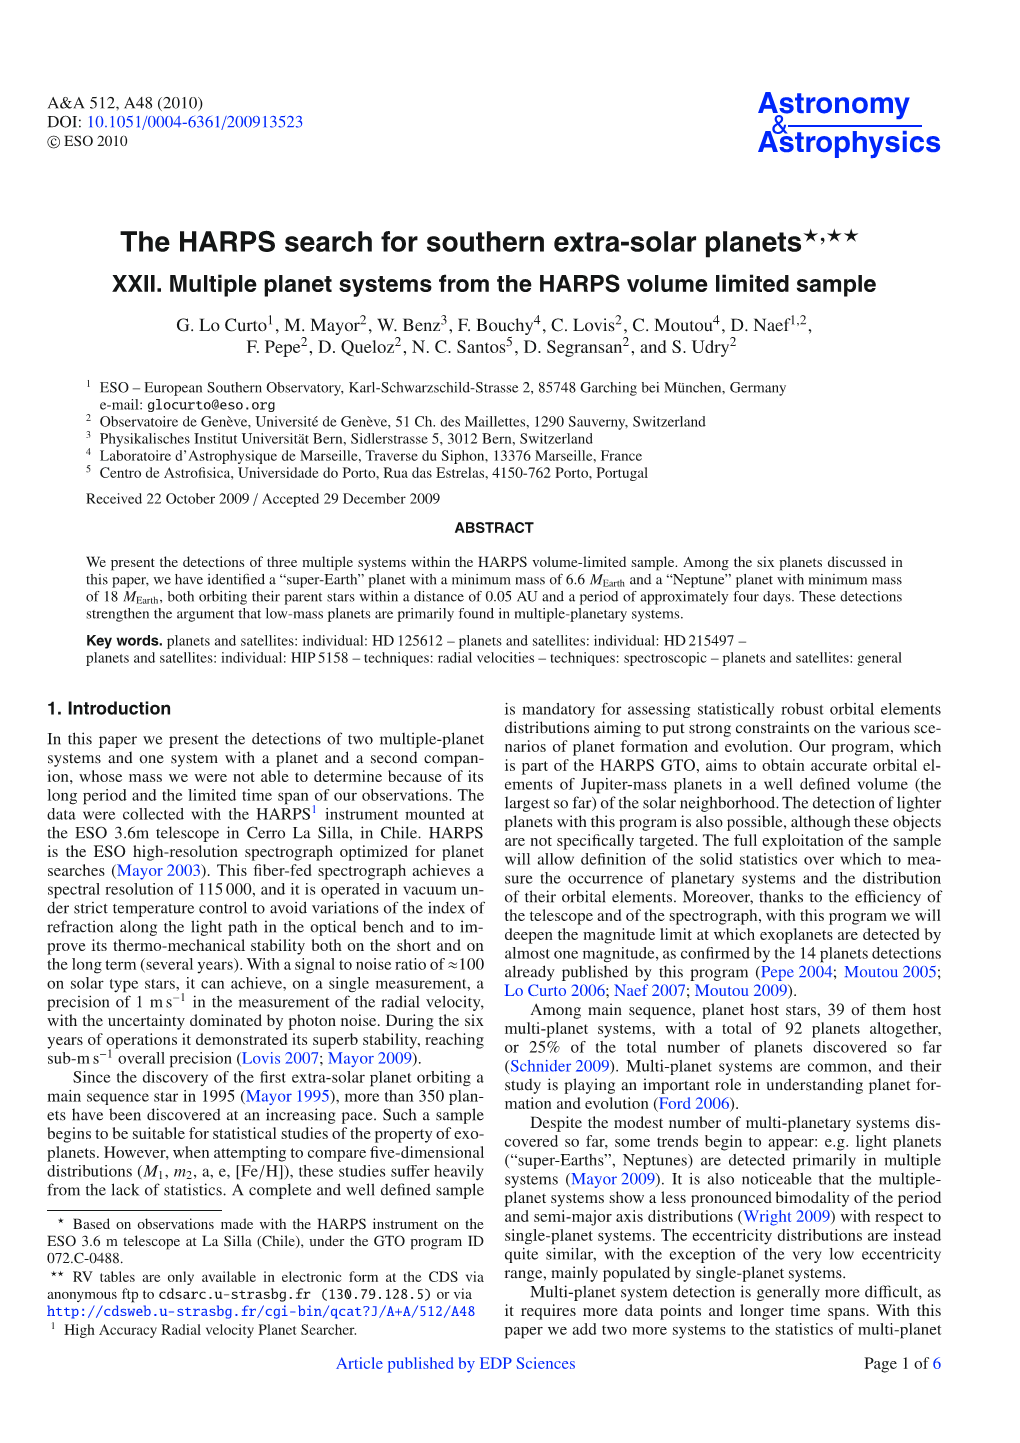 The HARPS Search for Southern Extra-Solar Planets�,�� XXII